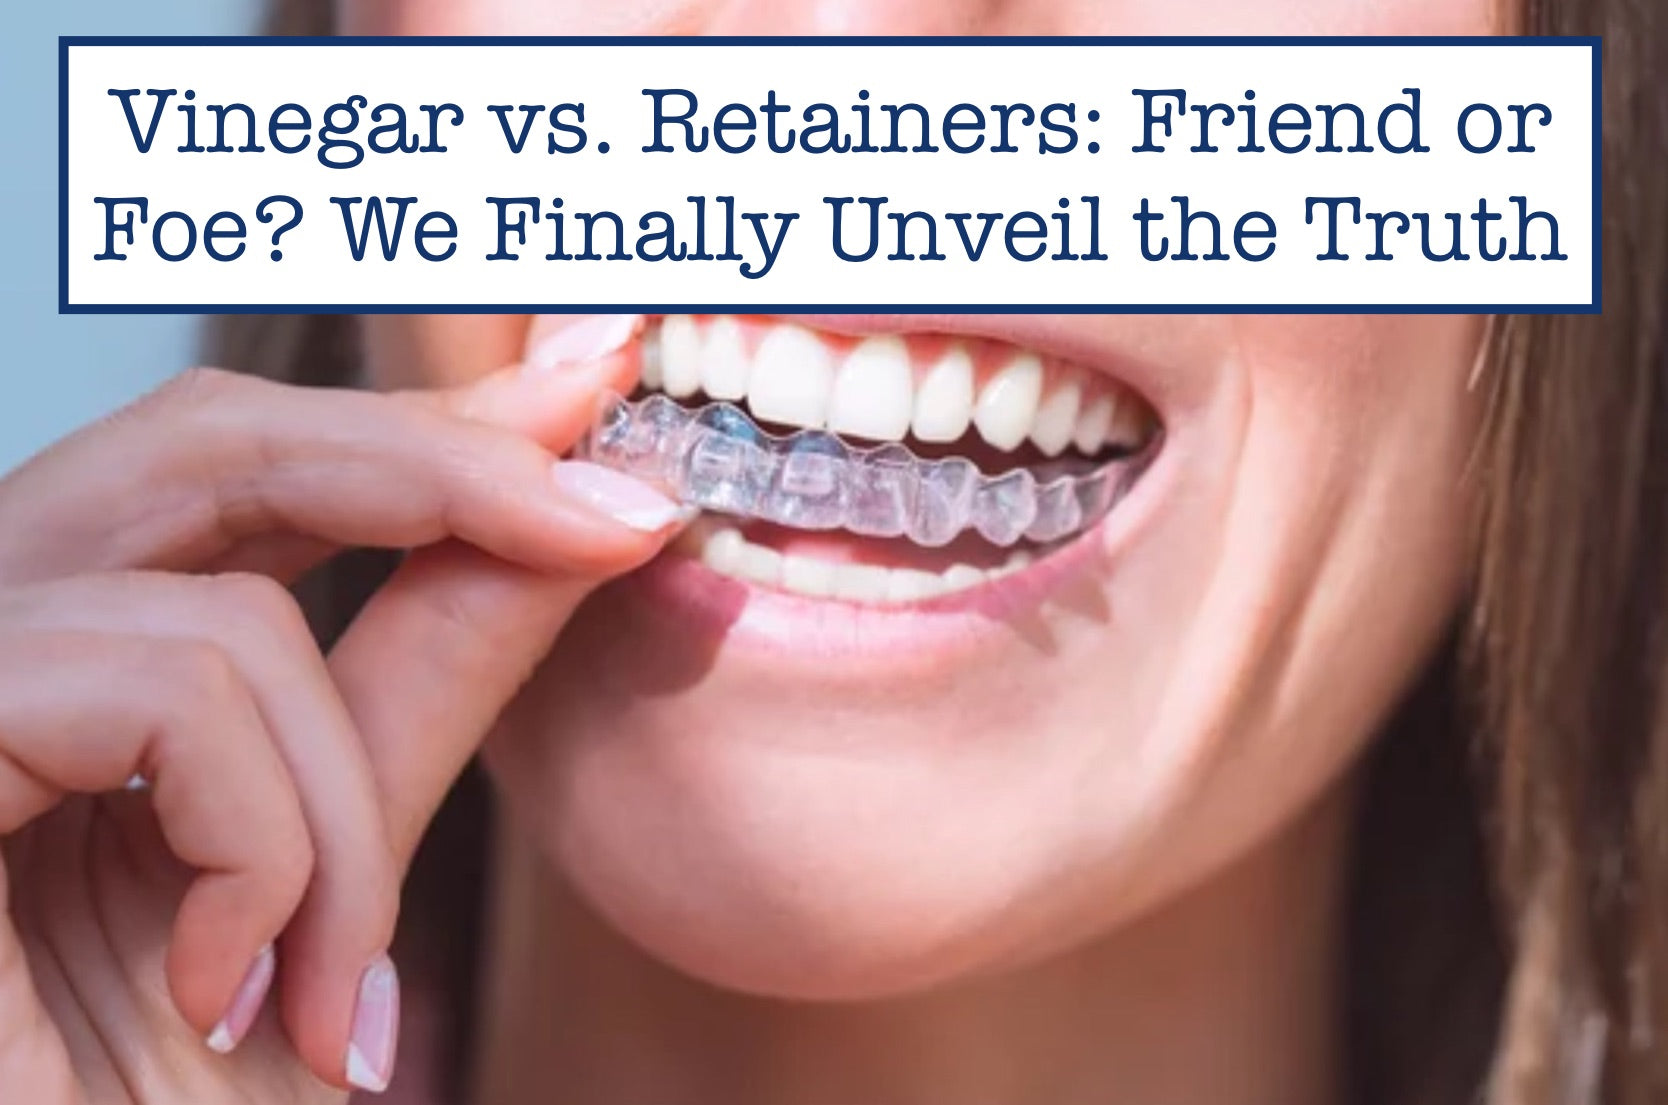 Vinegar vs. Retainers: Friend or Foe? We Finally Unveil the Truth